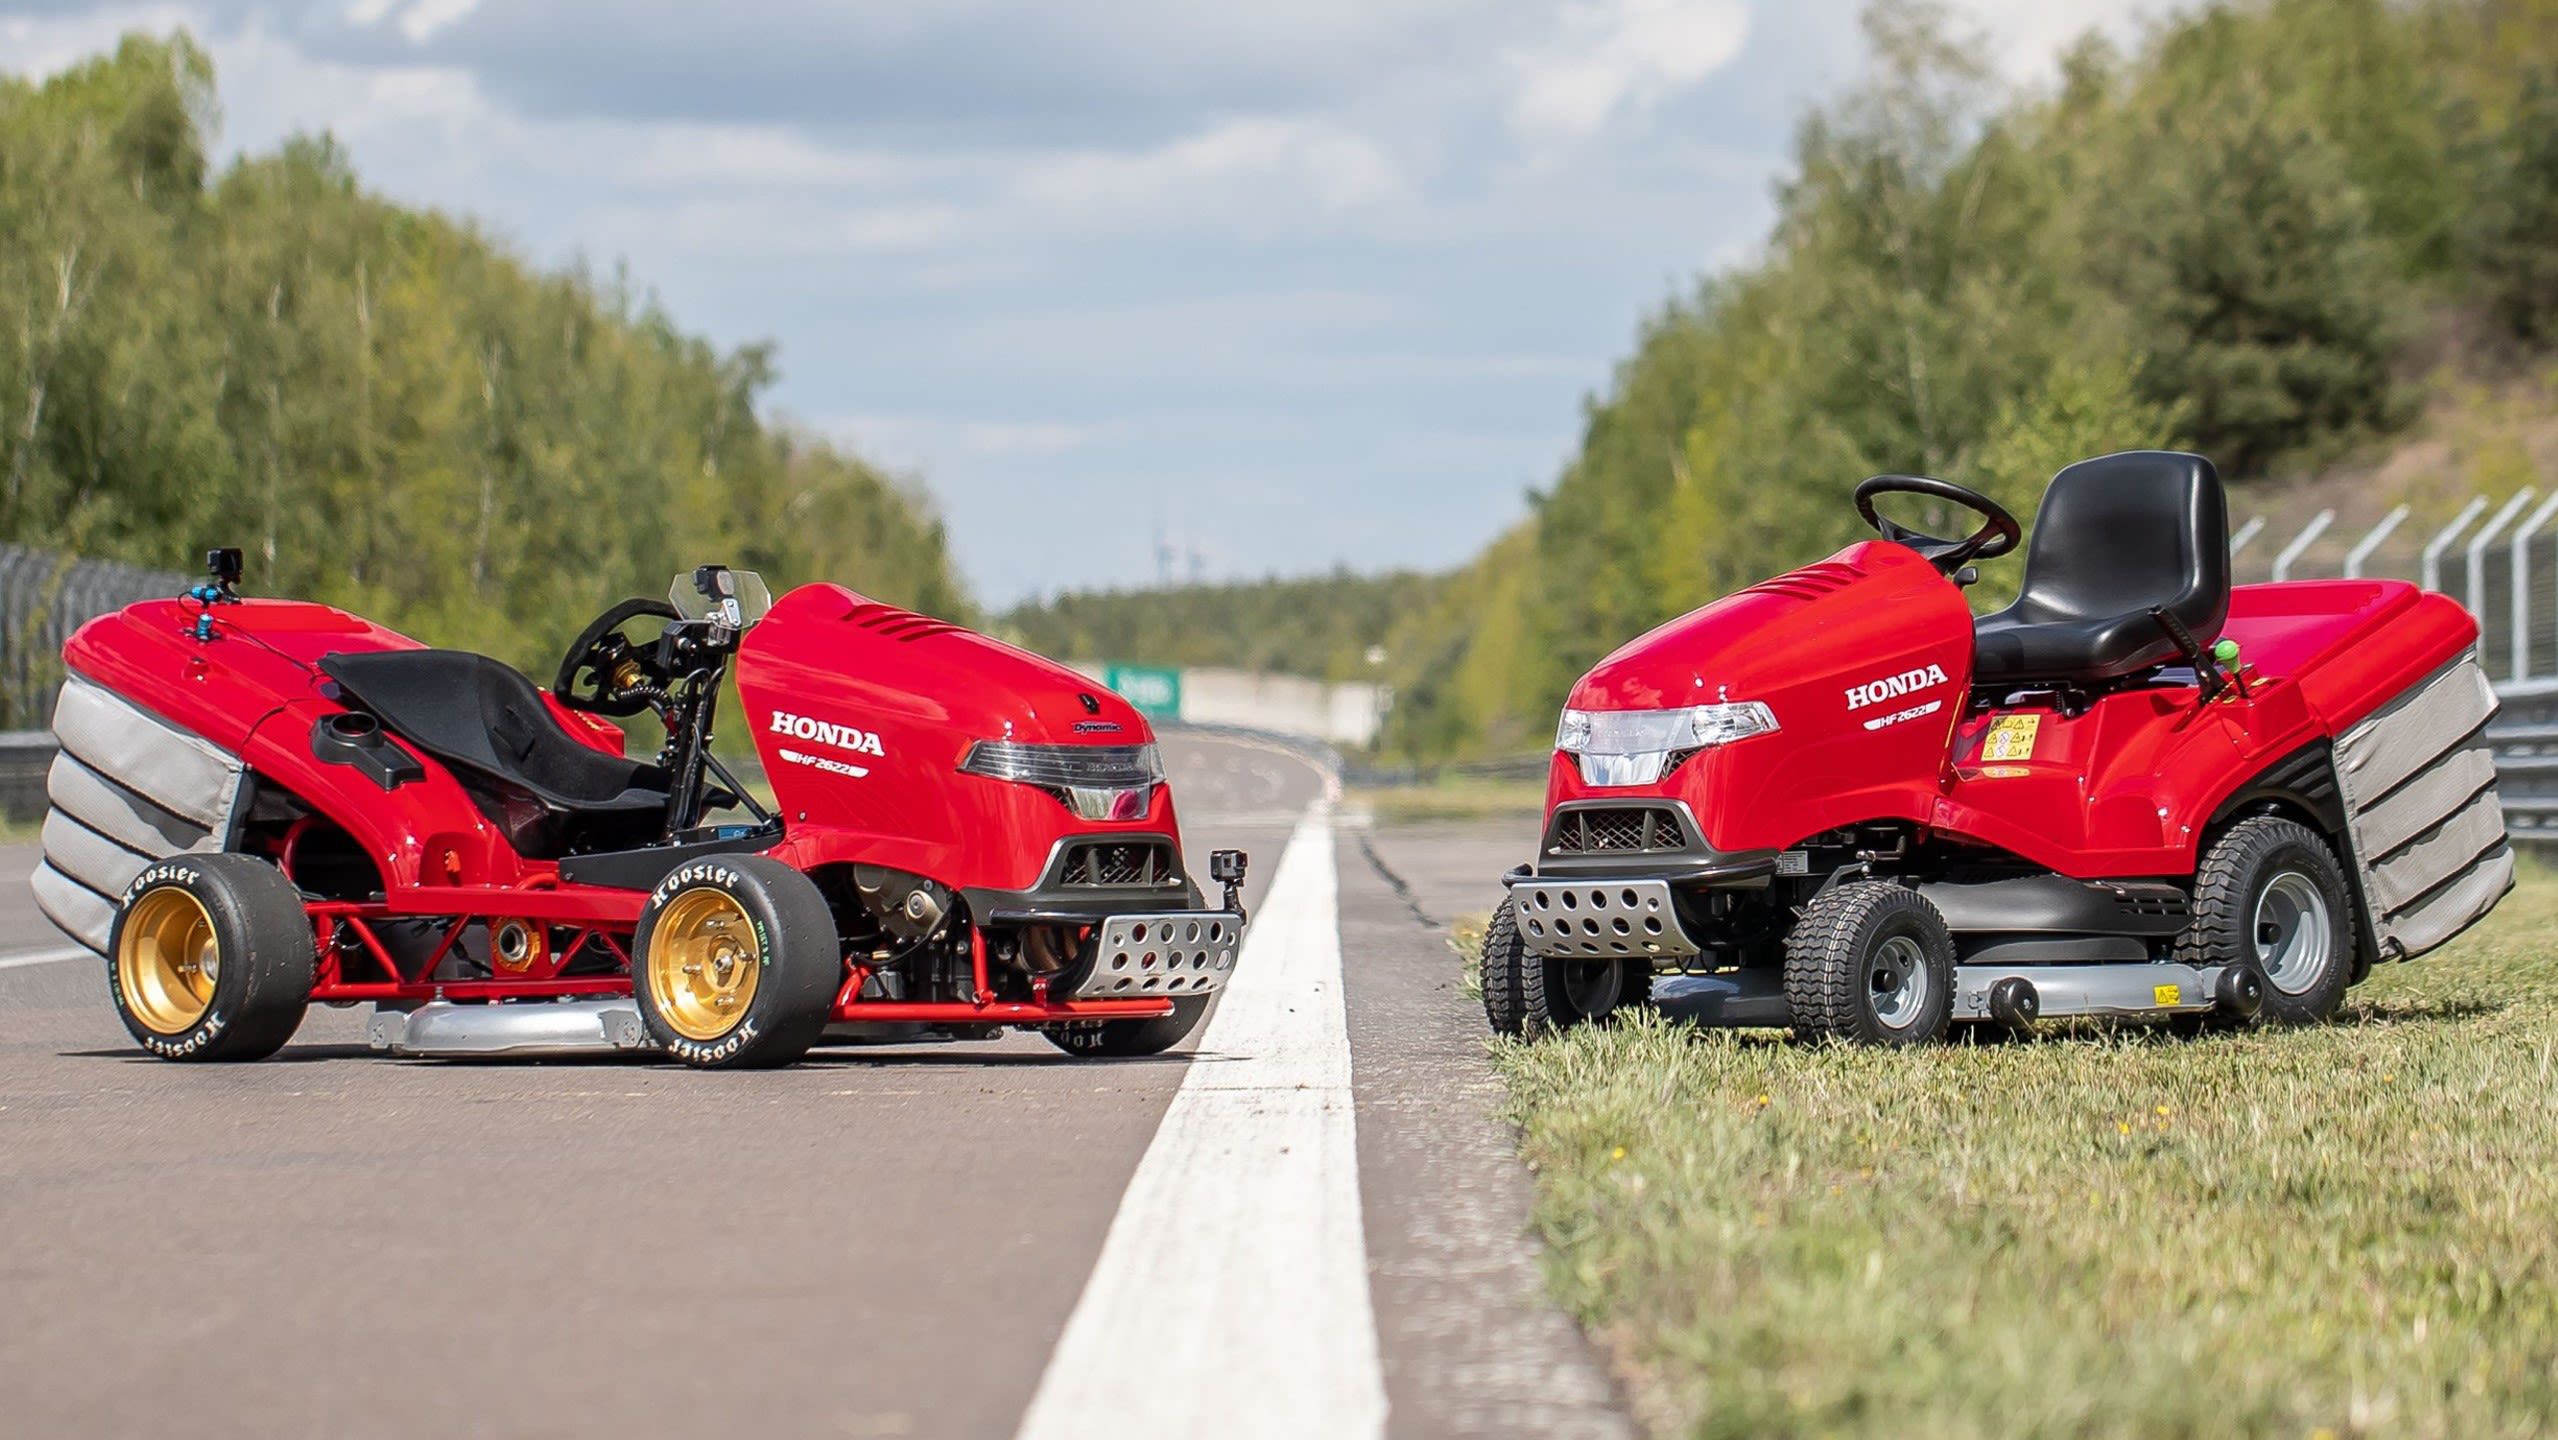 This Honda lawnmower is the fastest in the world, hitting 100 mph in 6 seconds | CNN